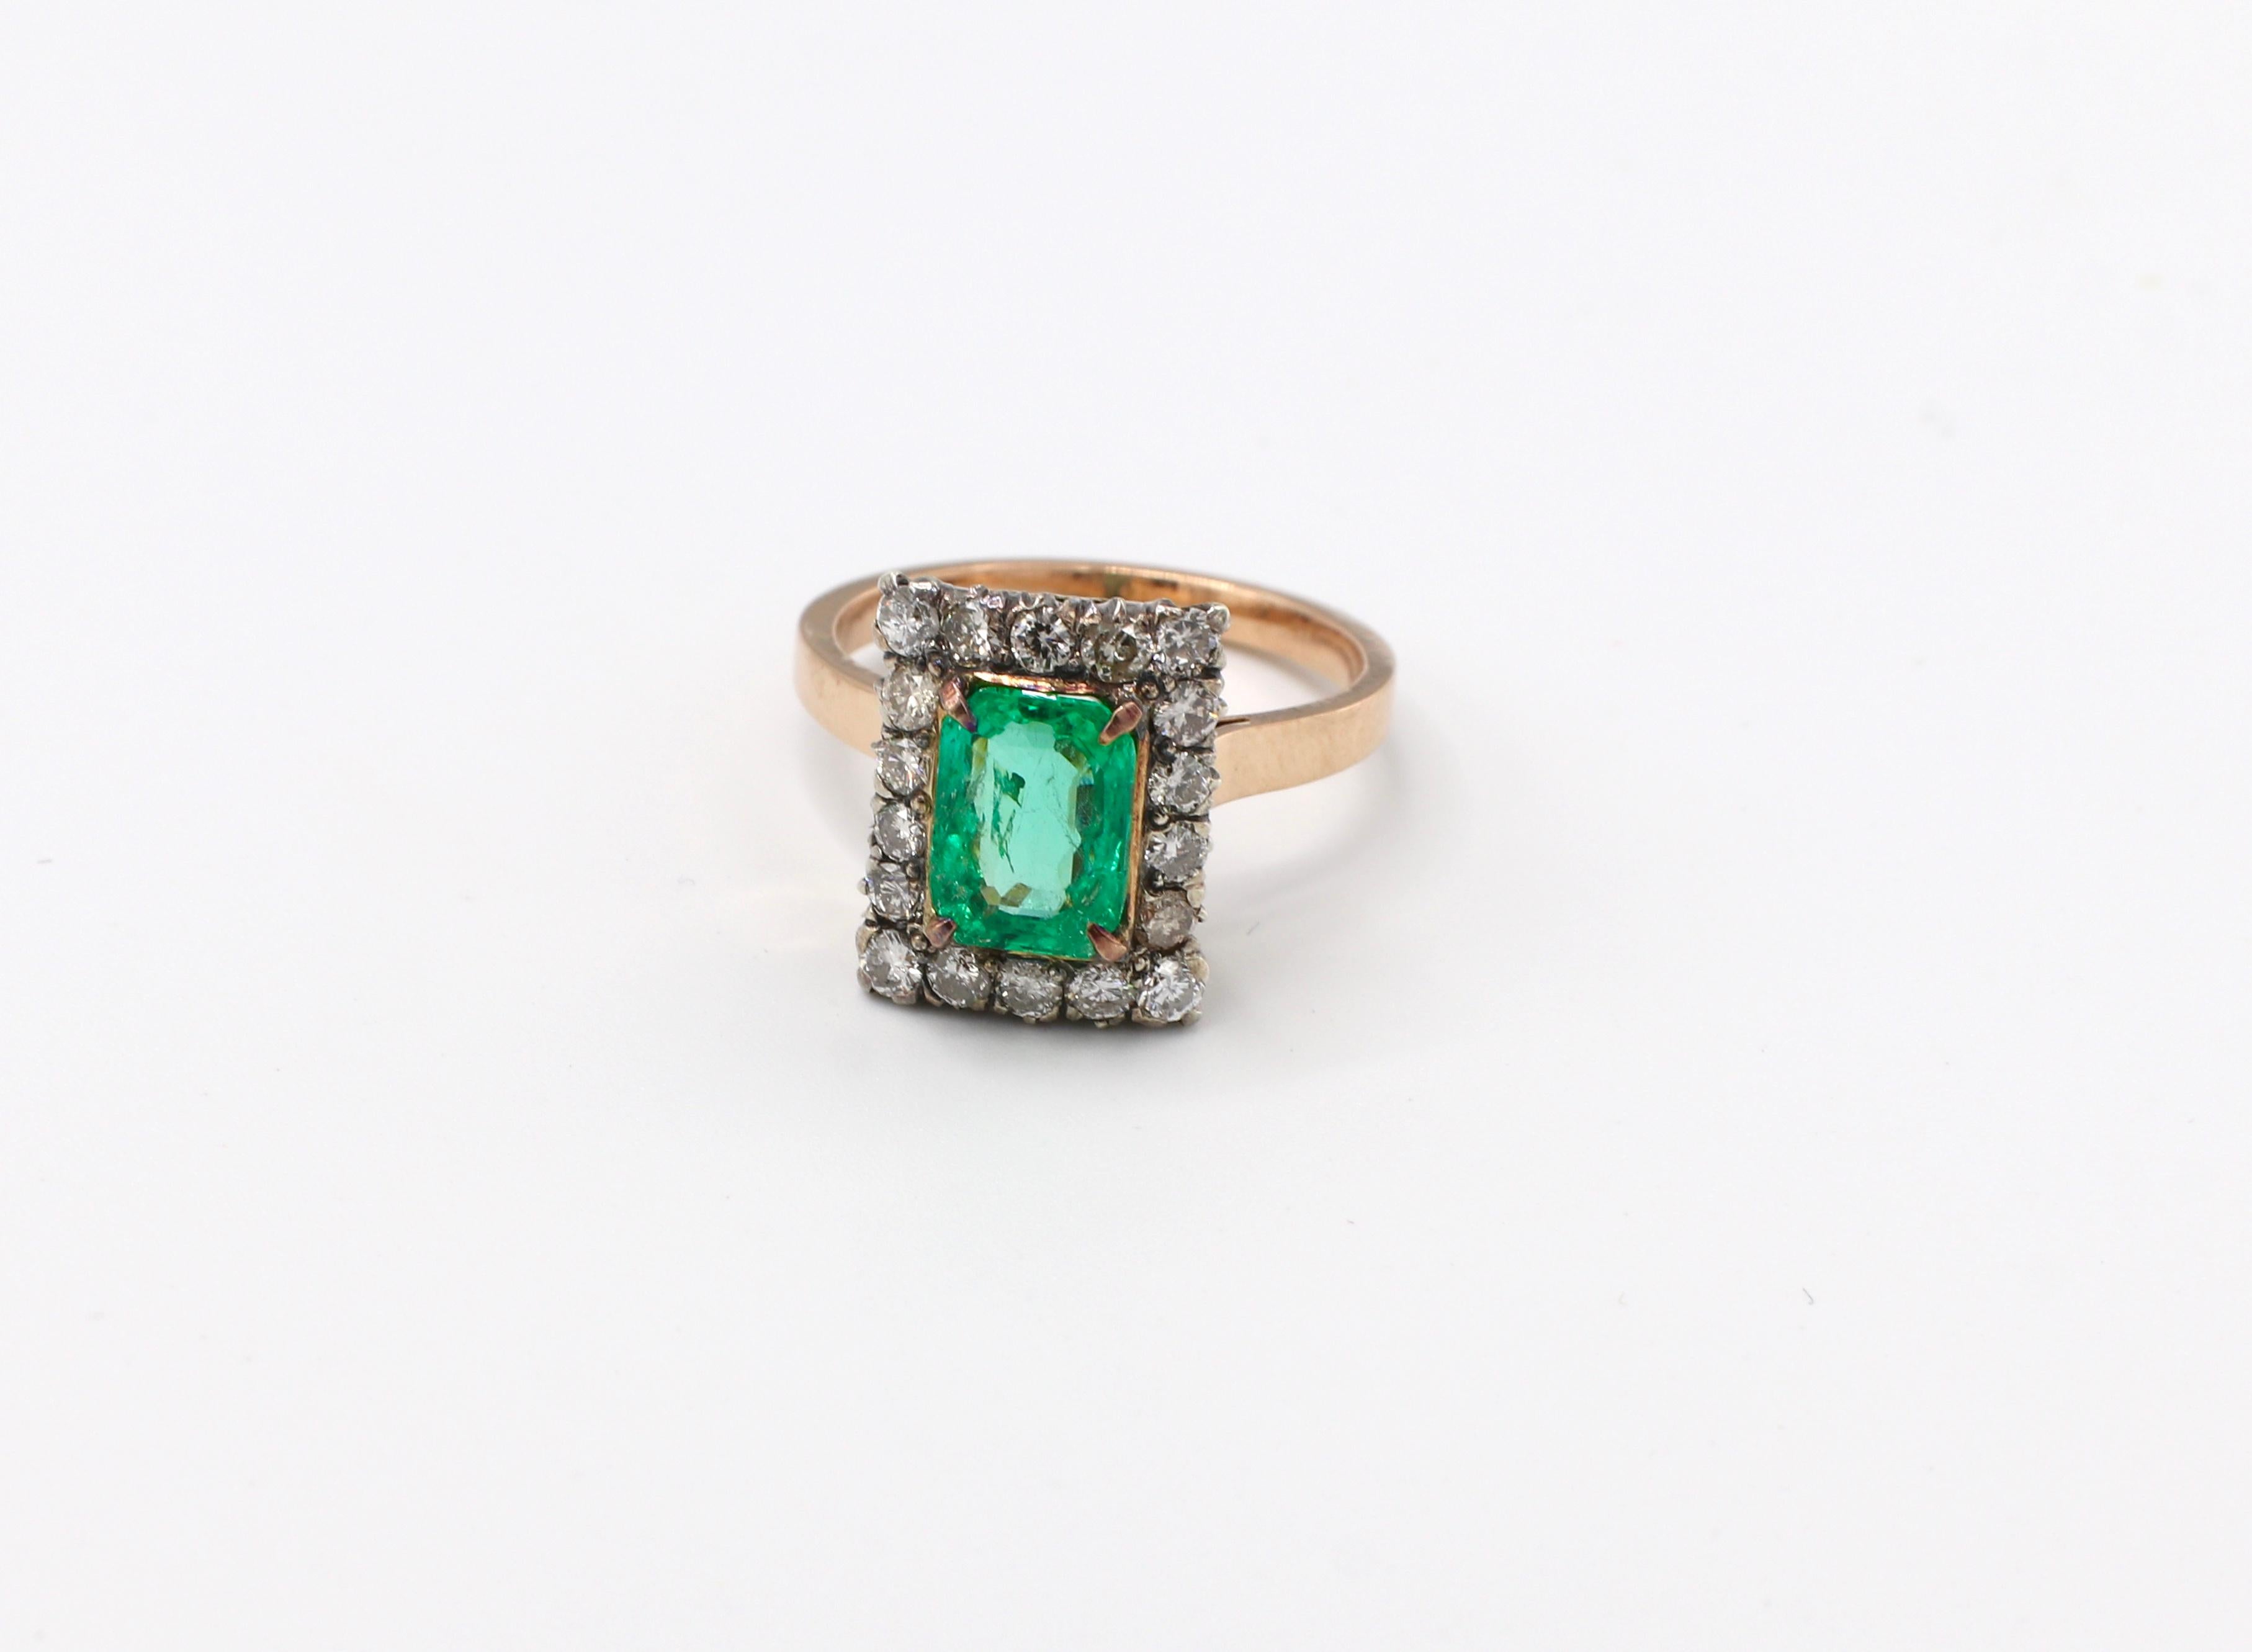 GIA Certified Antique 14 Karat Yellow Gold Emerald & Diamond Halo Cocktail Ring Size 6.25
GIA Report Number: 2211407813 (please note original GIA report pictured for details) 
Metal: 14k yellow gold
Weight: 4.10 grams
Emerald: 1.49 carats, Colombia